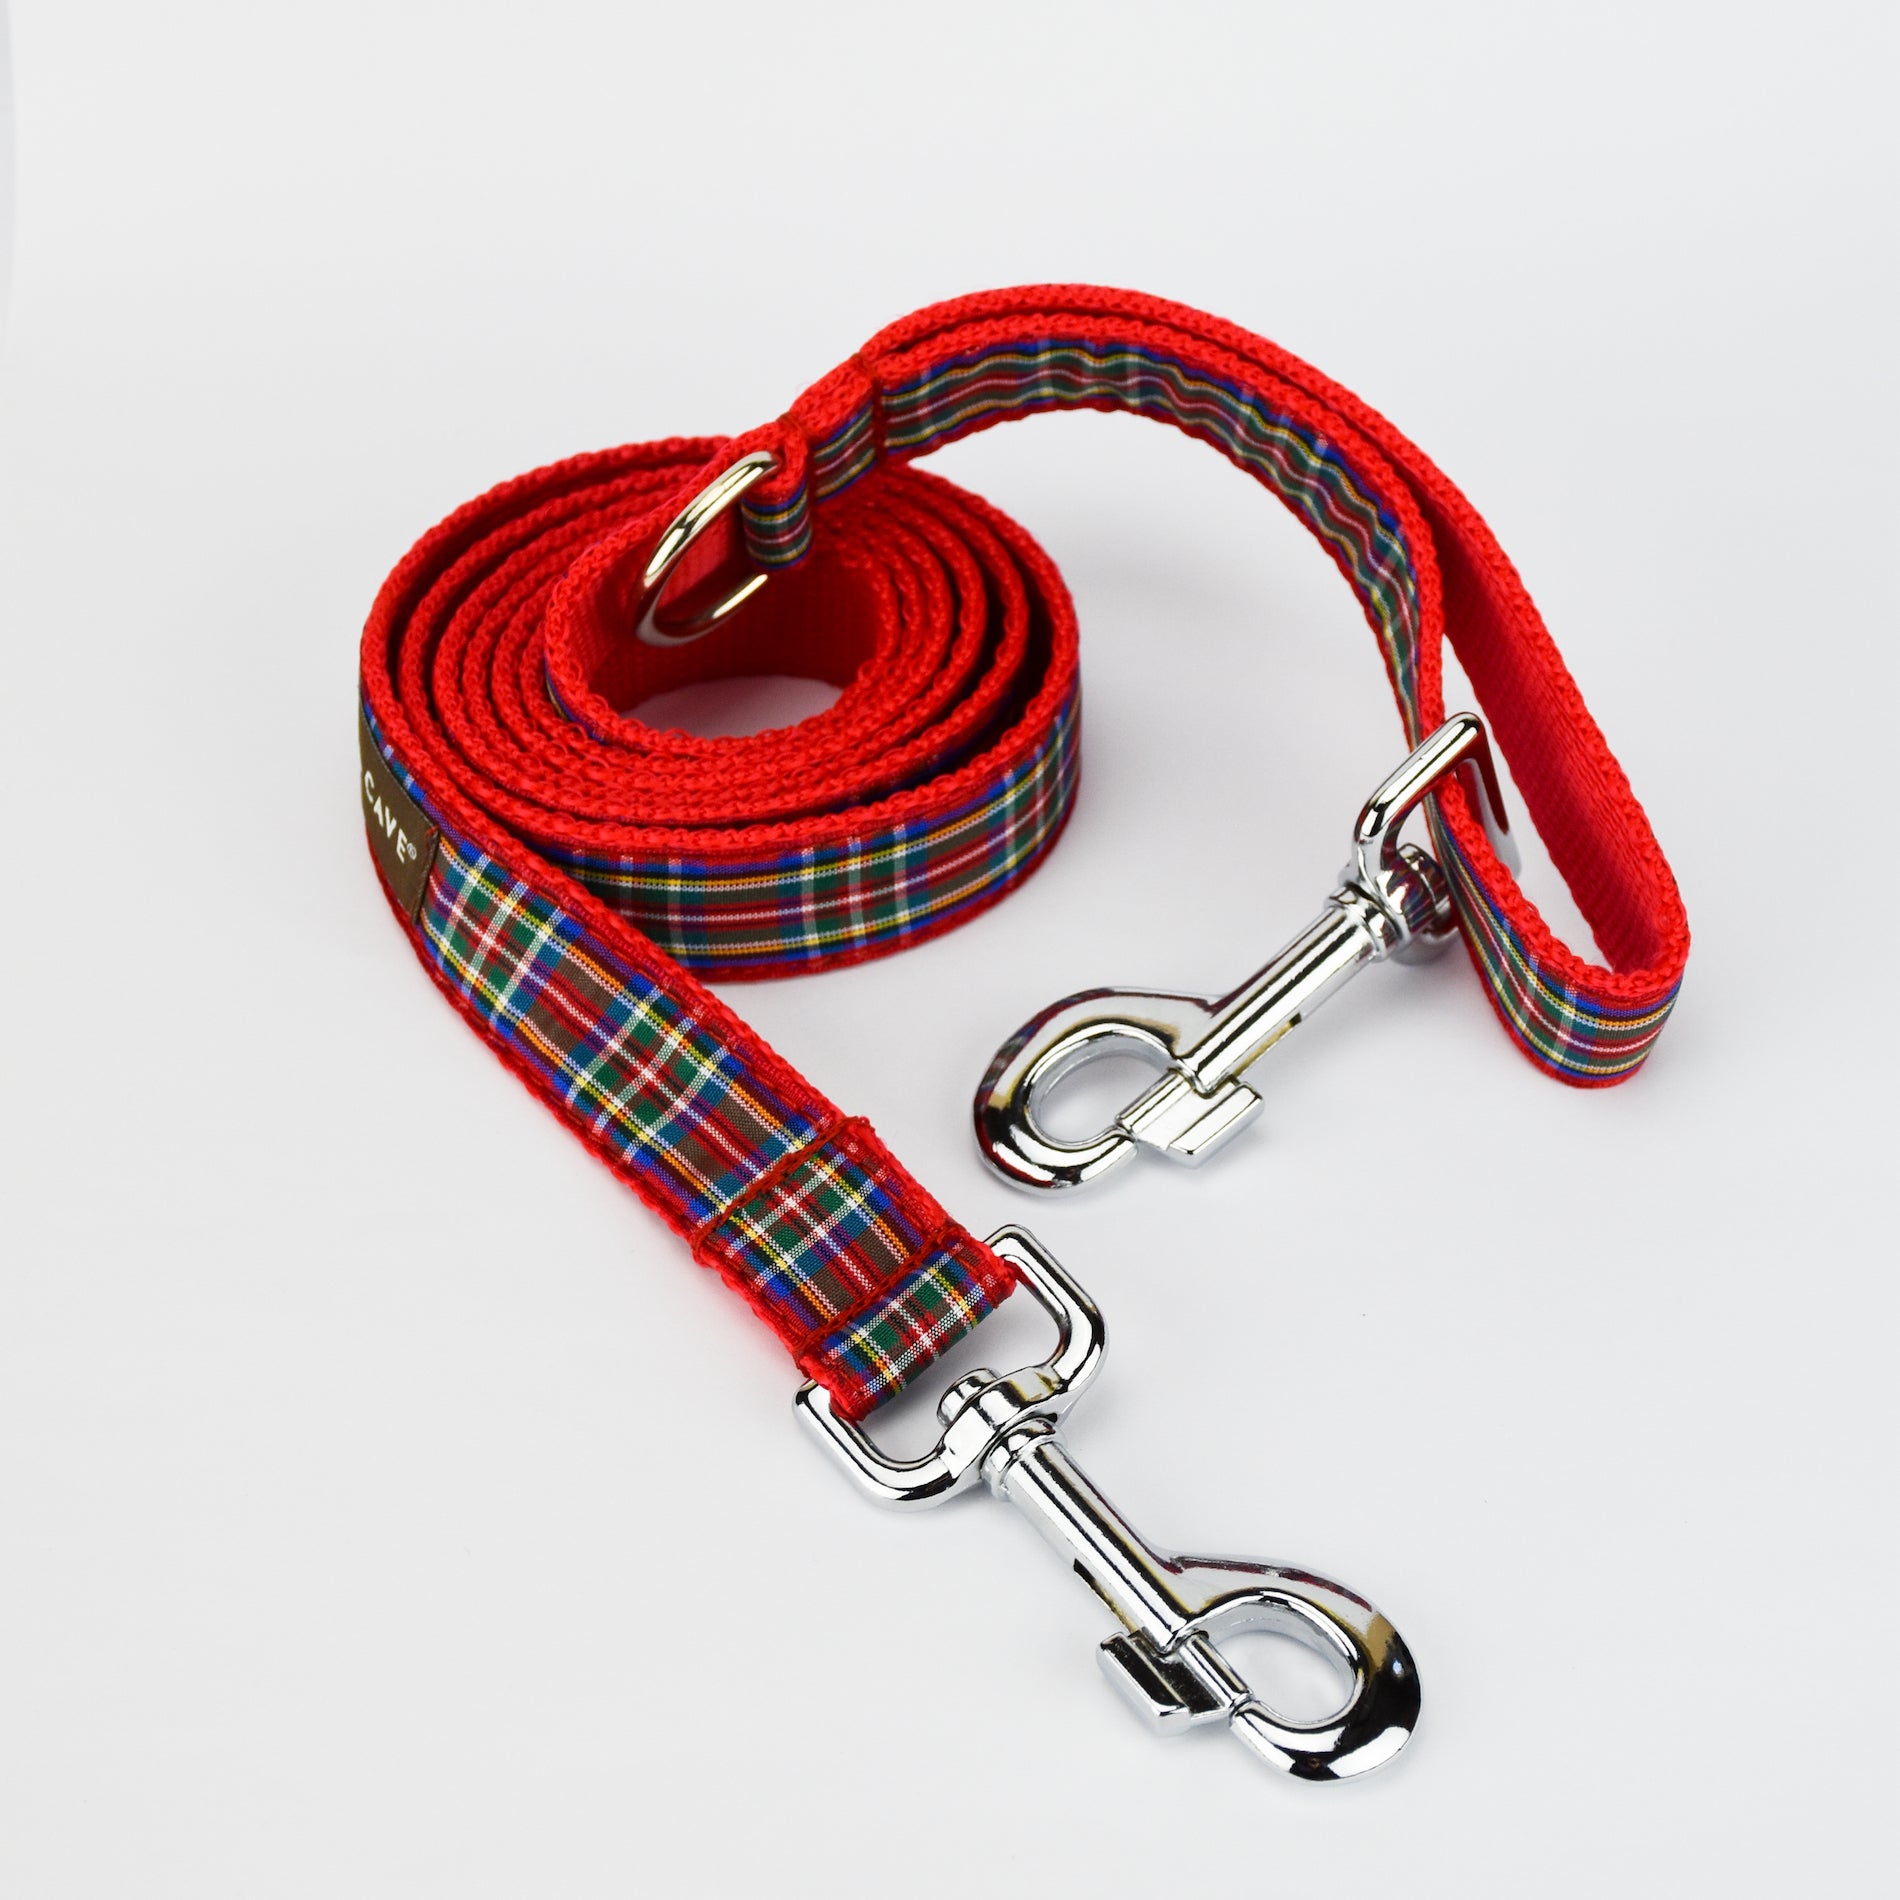 KONA CAVE® leash in Royal Stewart Scottish Tartan Dog Ribbon Leash / Lead with double-ended clip function for hands-free walks